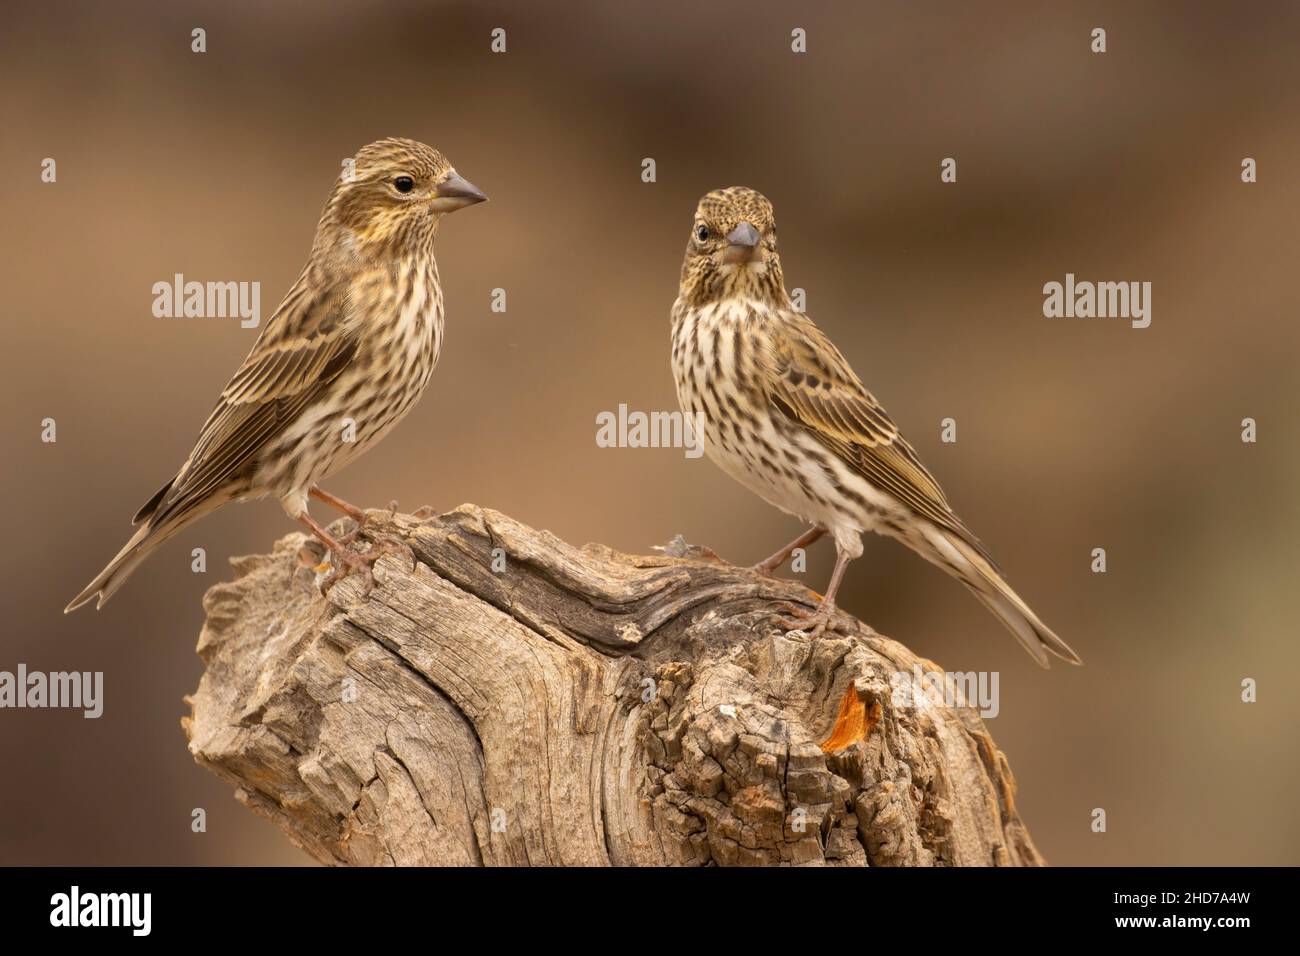 Cassin's Finch (Haemorhous cassinii), Cabin Lake Viewing Blind, Deschutes National Forest, Oregon. Stockfoto